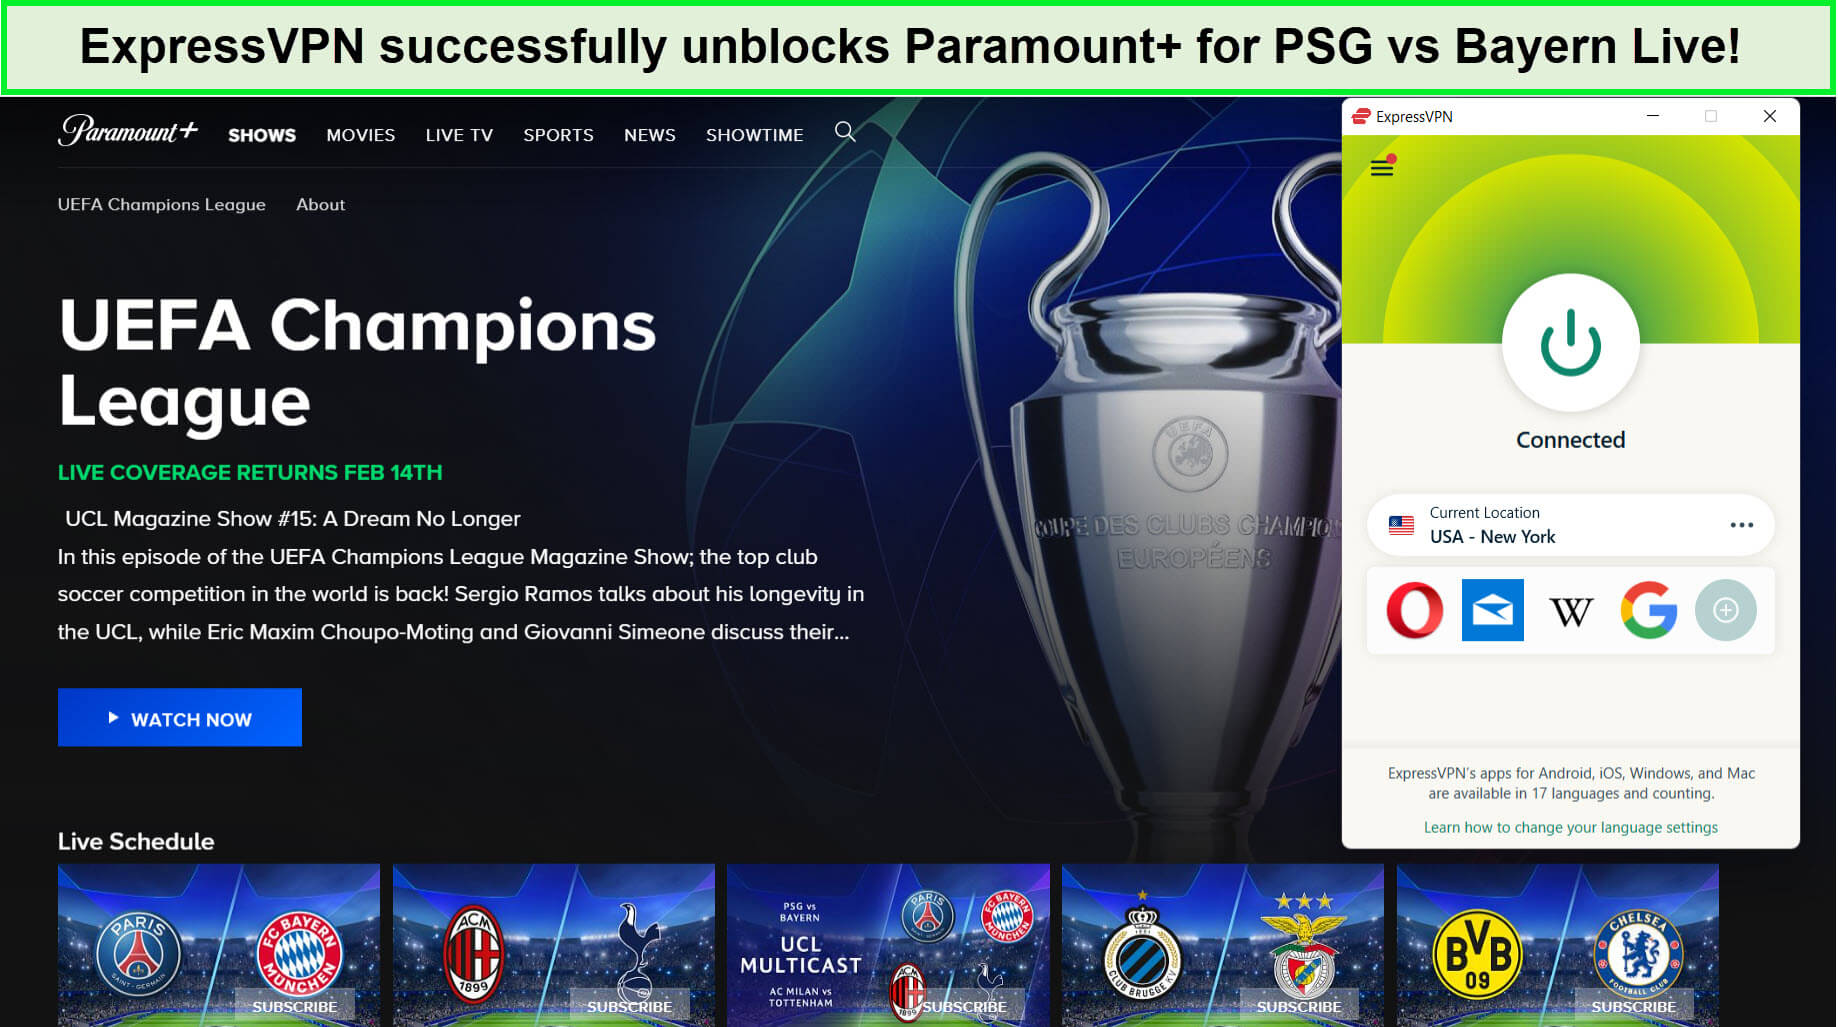 paramount-plus-unblocked-with-expressvpn-for-psg-vs-bayern-live-in-UK